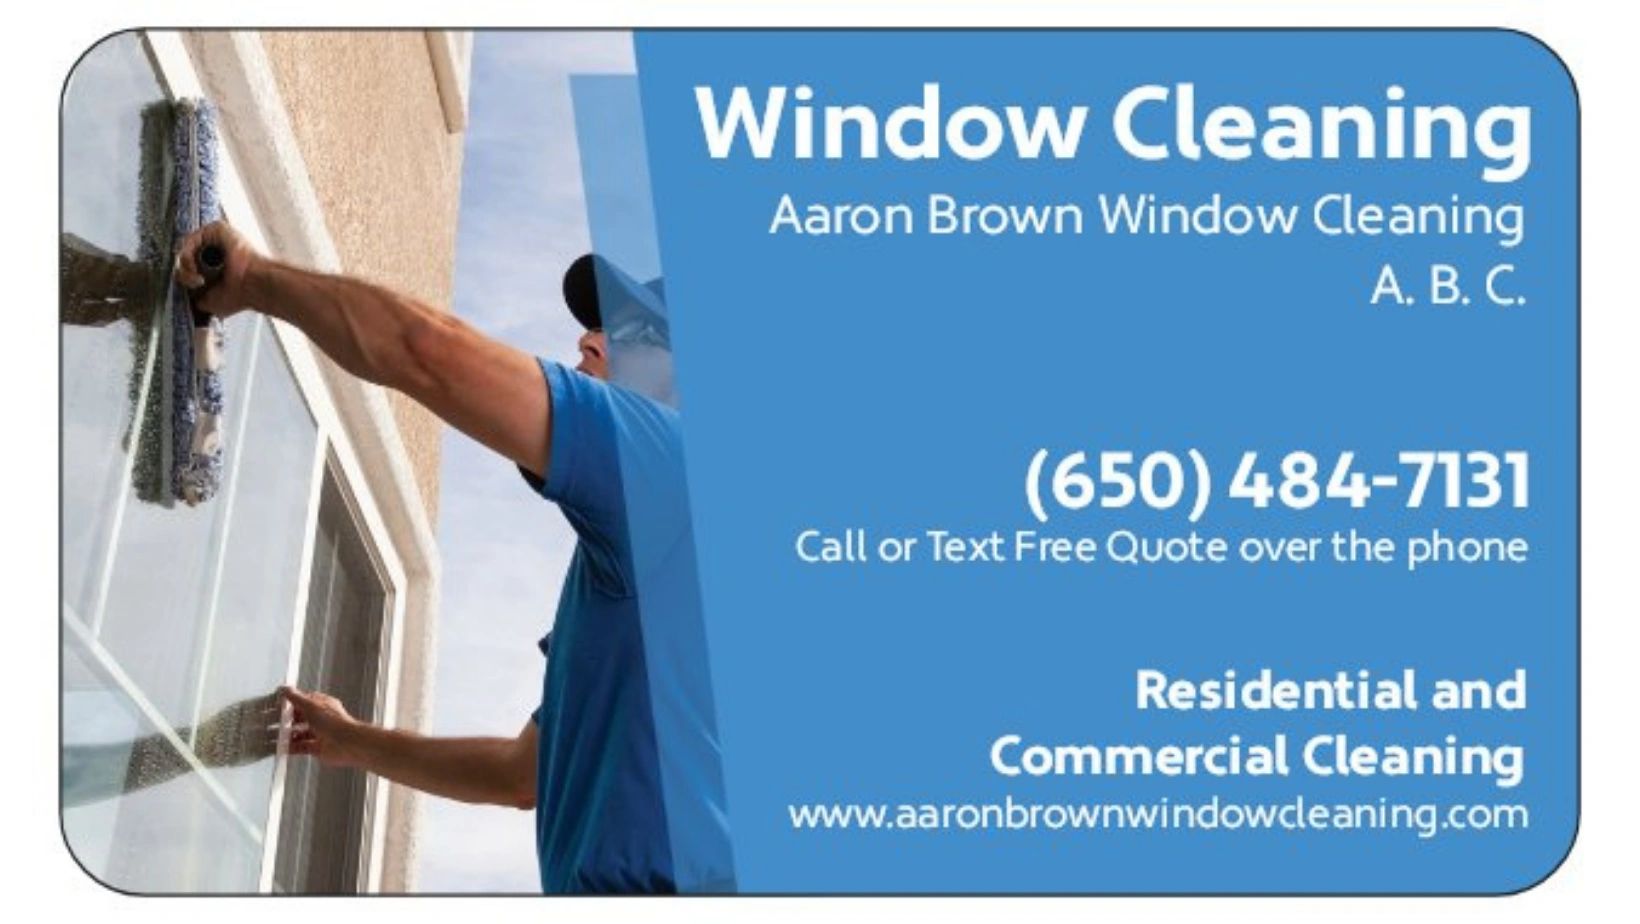 Window Cleaners Services in Highlands Ranch CO